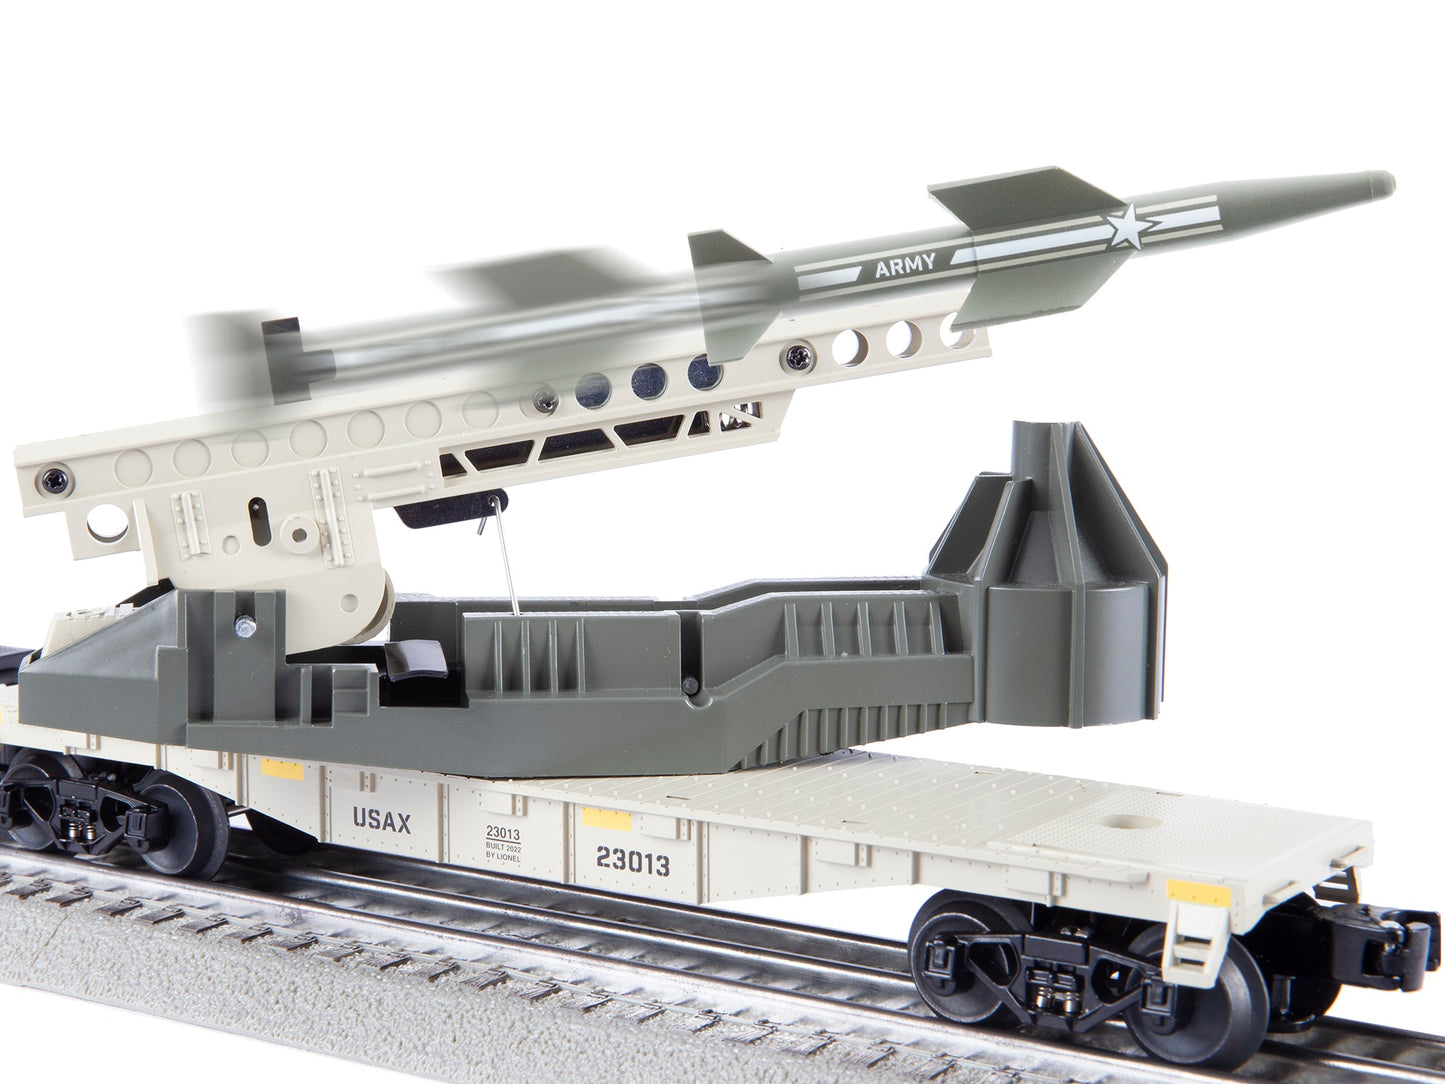 The missile for Model Train set O scale Lionel Army Freight LionChief.